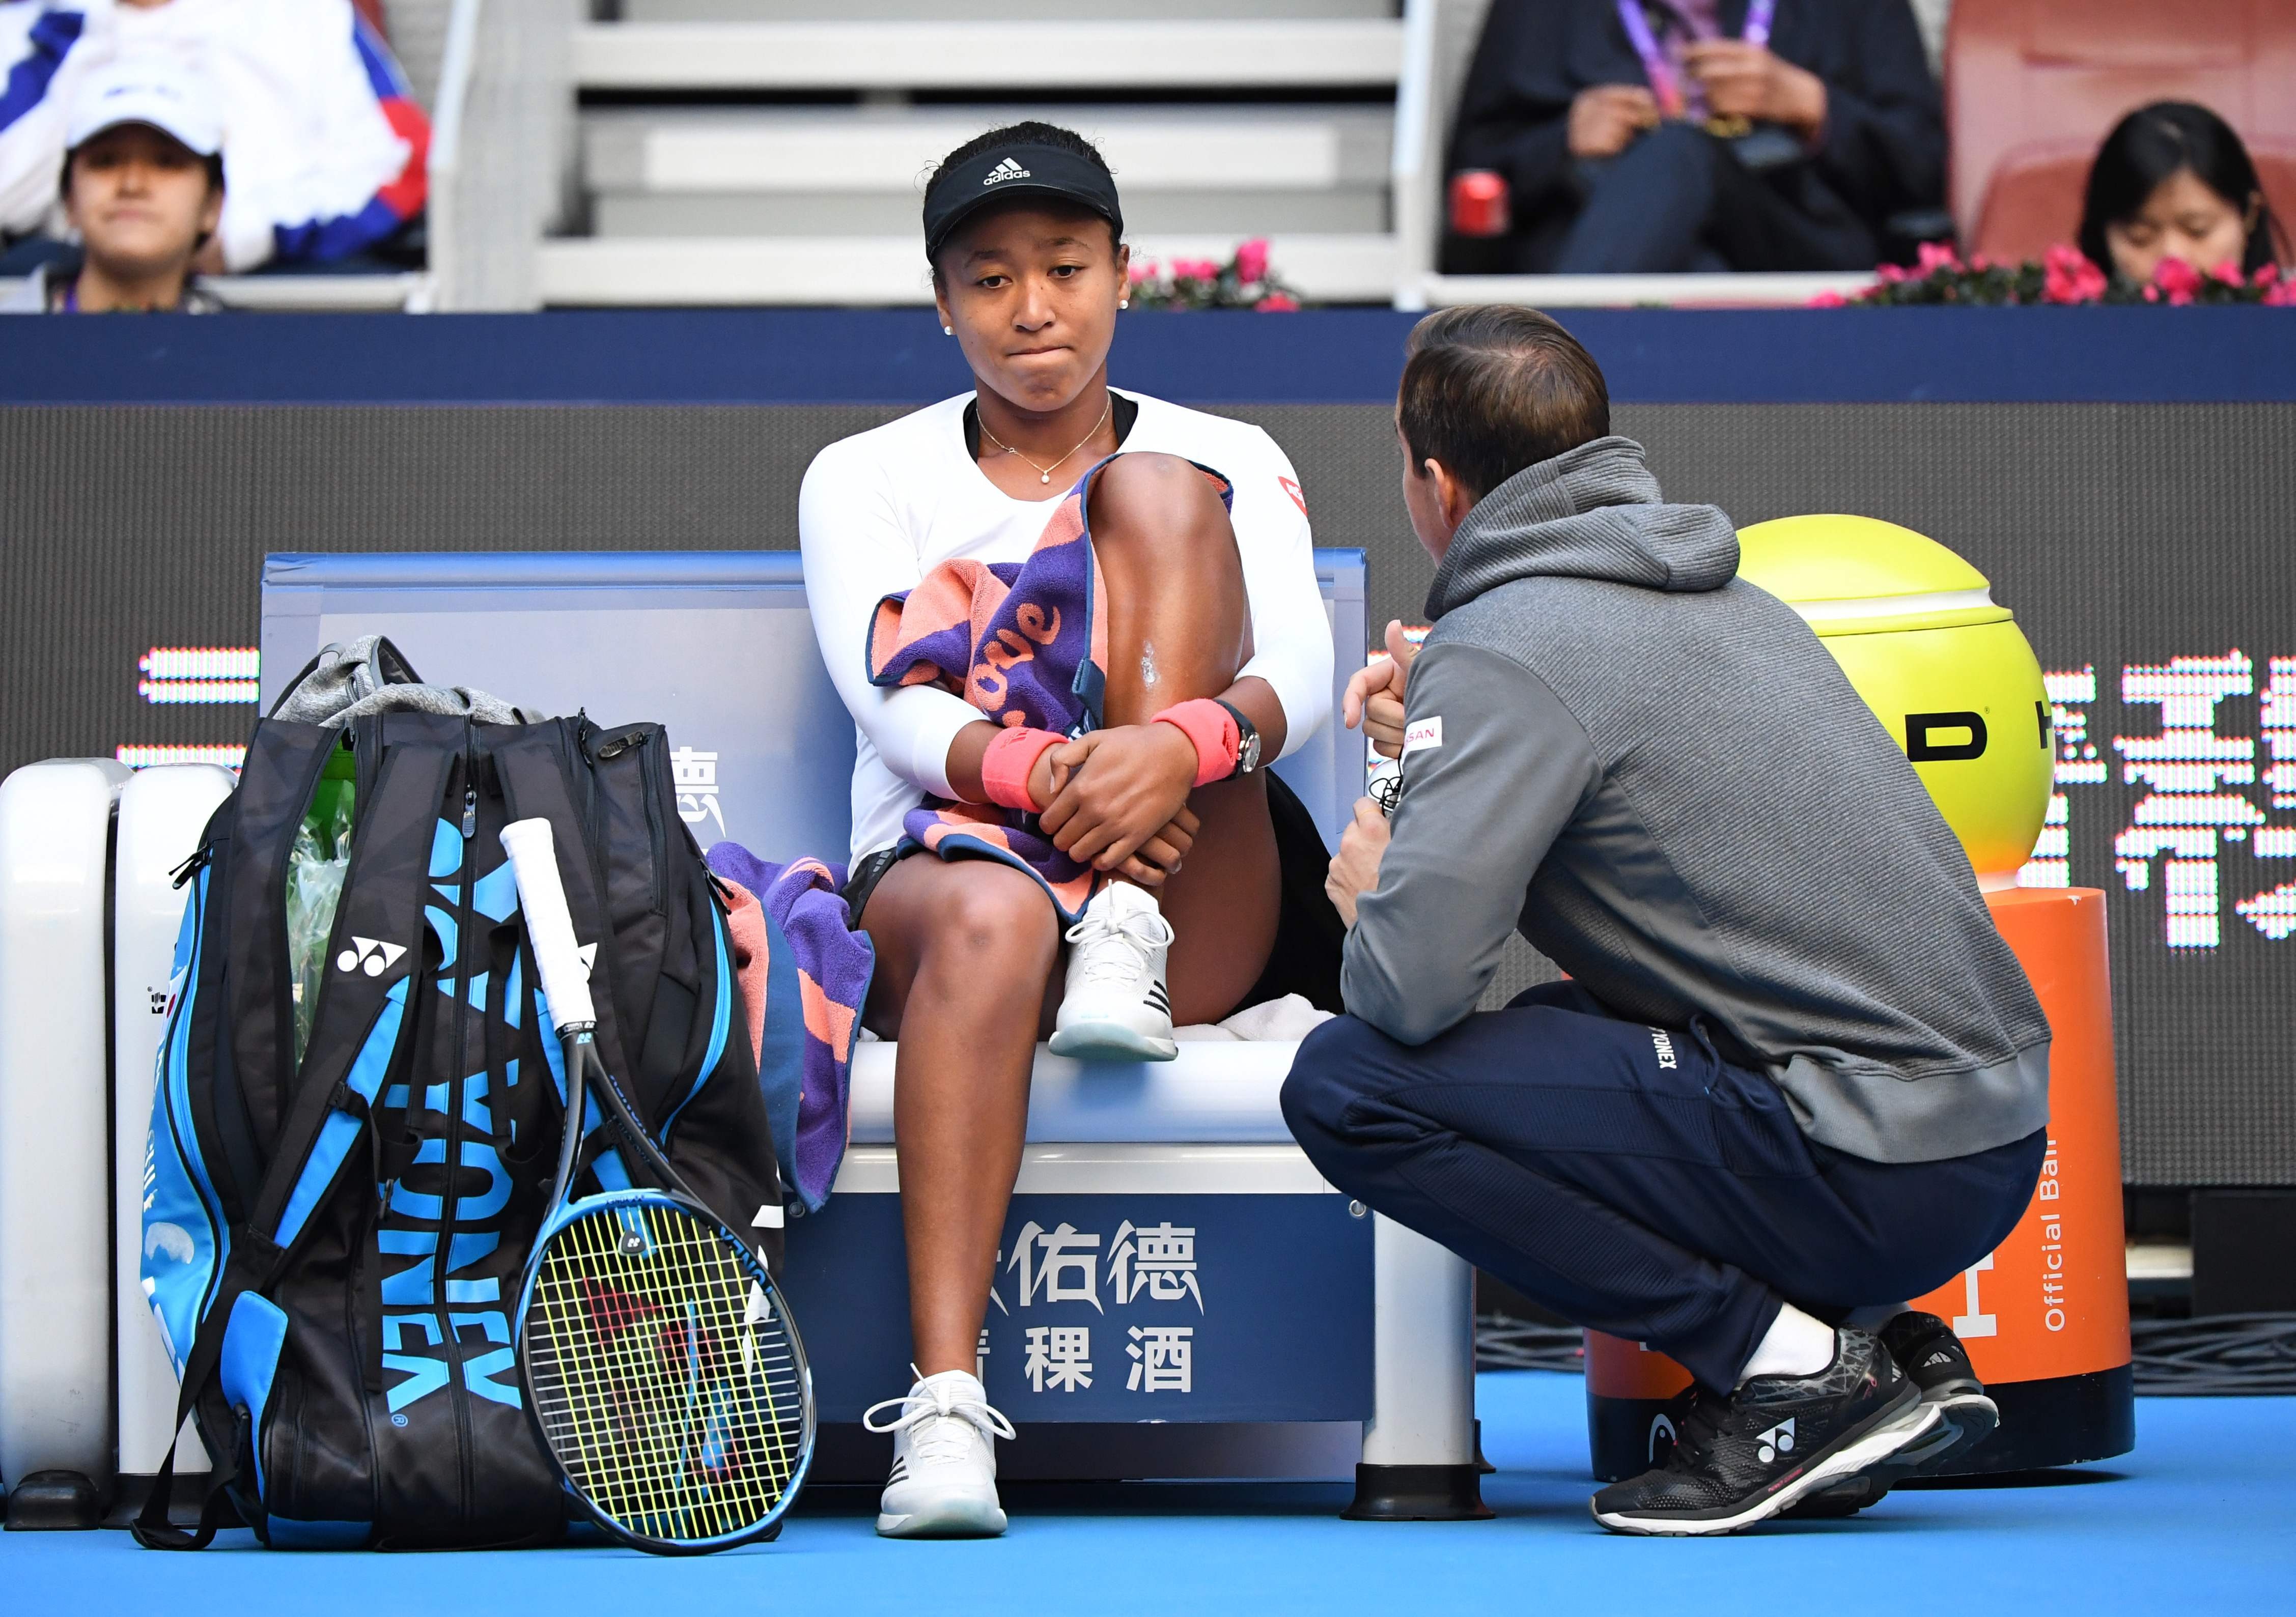 Naomi Osaka speaks with her coach during her semi-final against Anastasija Sevastova at the China Open in Beijing, during a match where she had treatment on her back. Photo: AFP